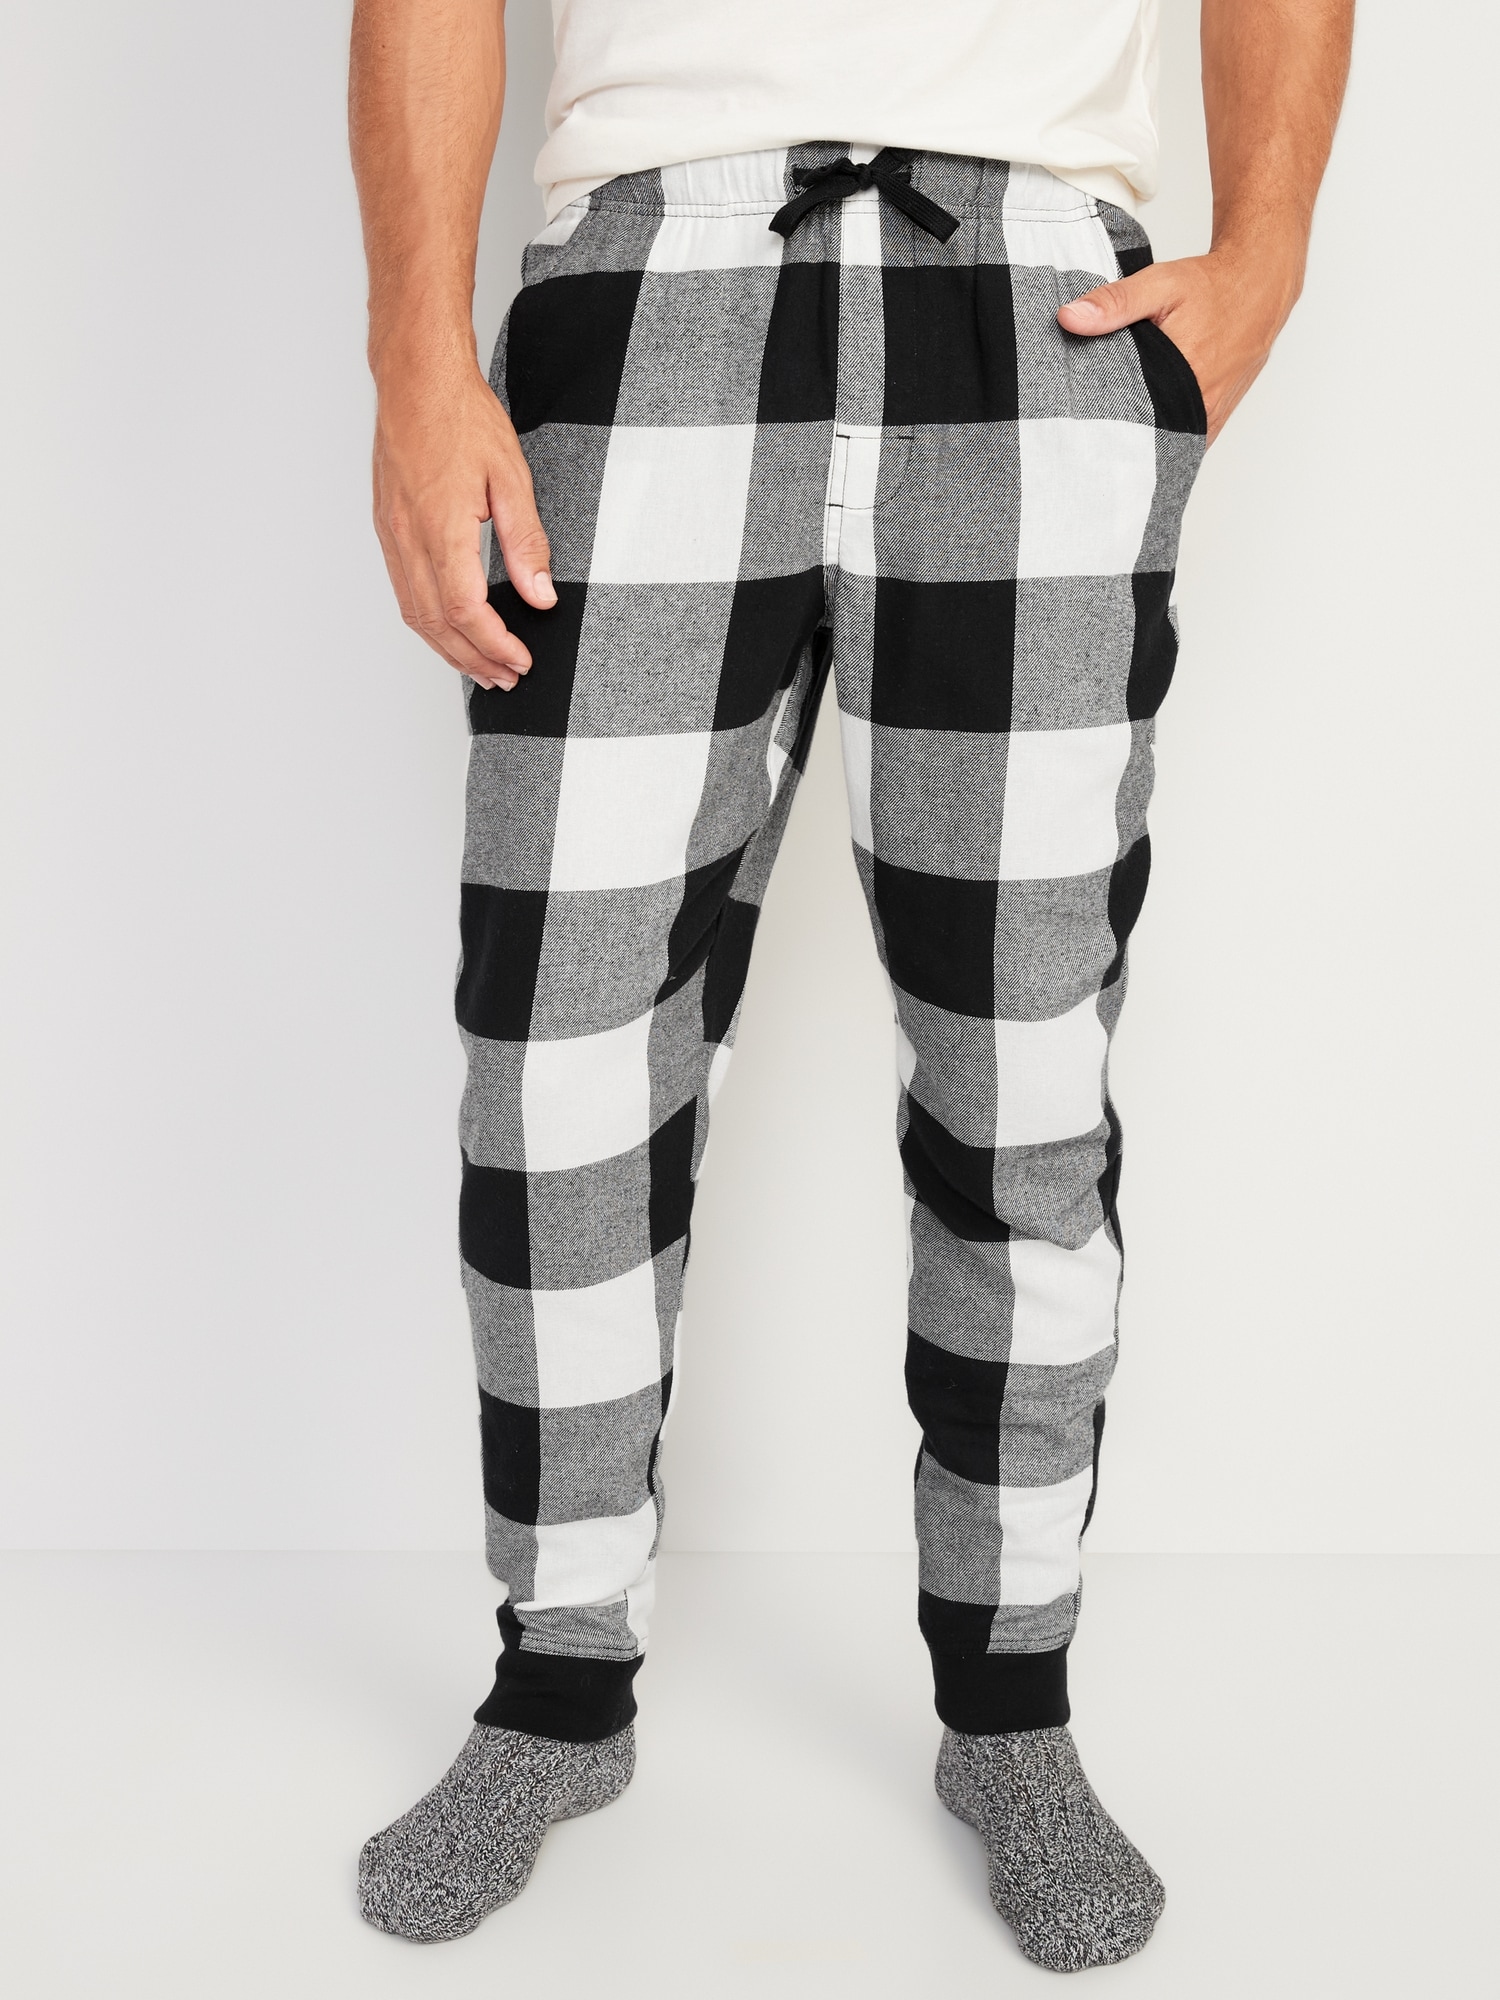 Matching Plaid Flannel Jogger Pajama Pants | Old Navy